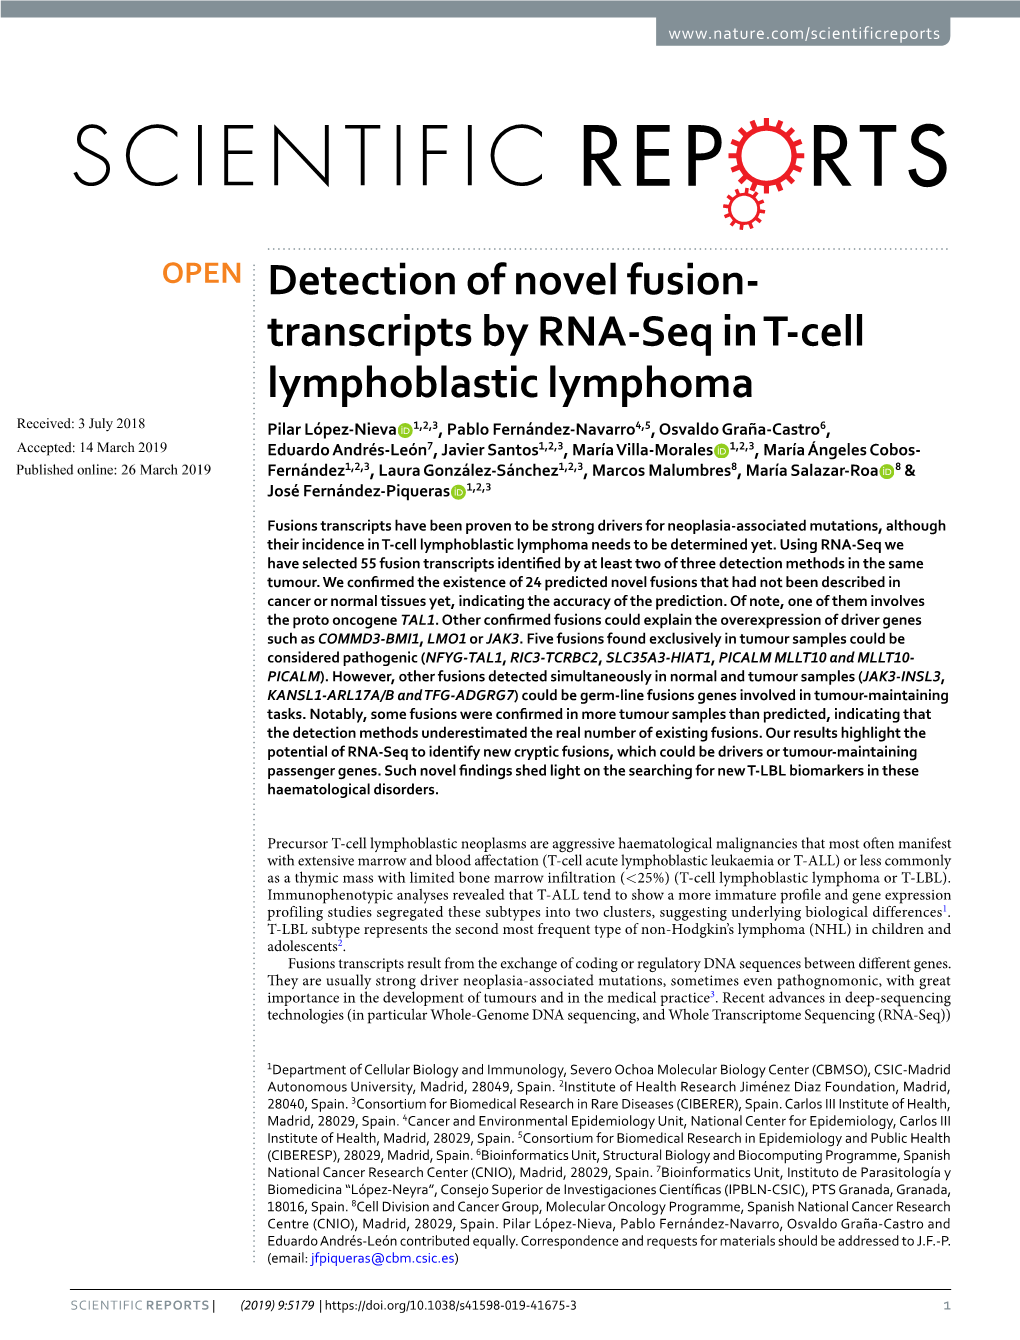 Detection of Novel Fusion-Transcripts by RNA-Seq in T-Cell Lymphoblastic